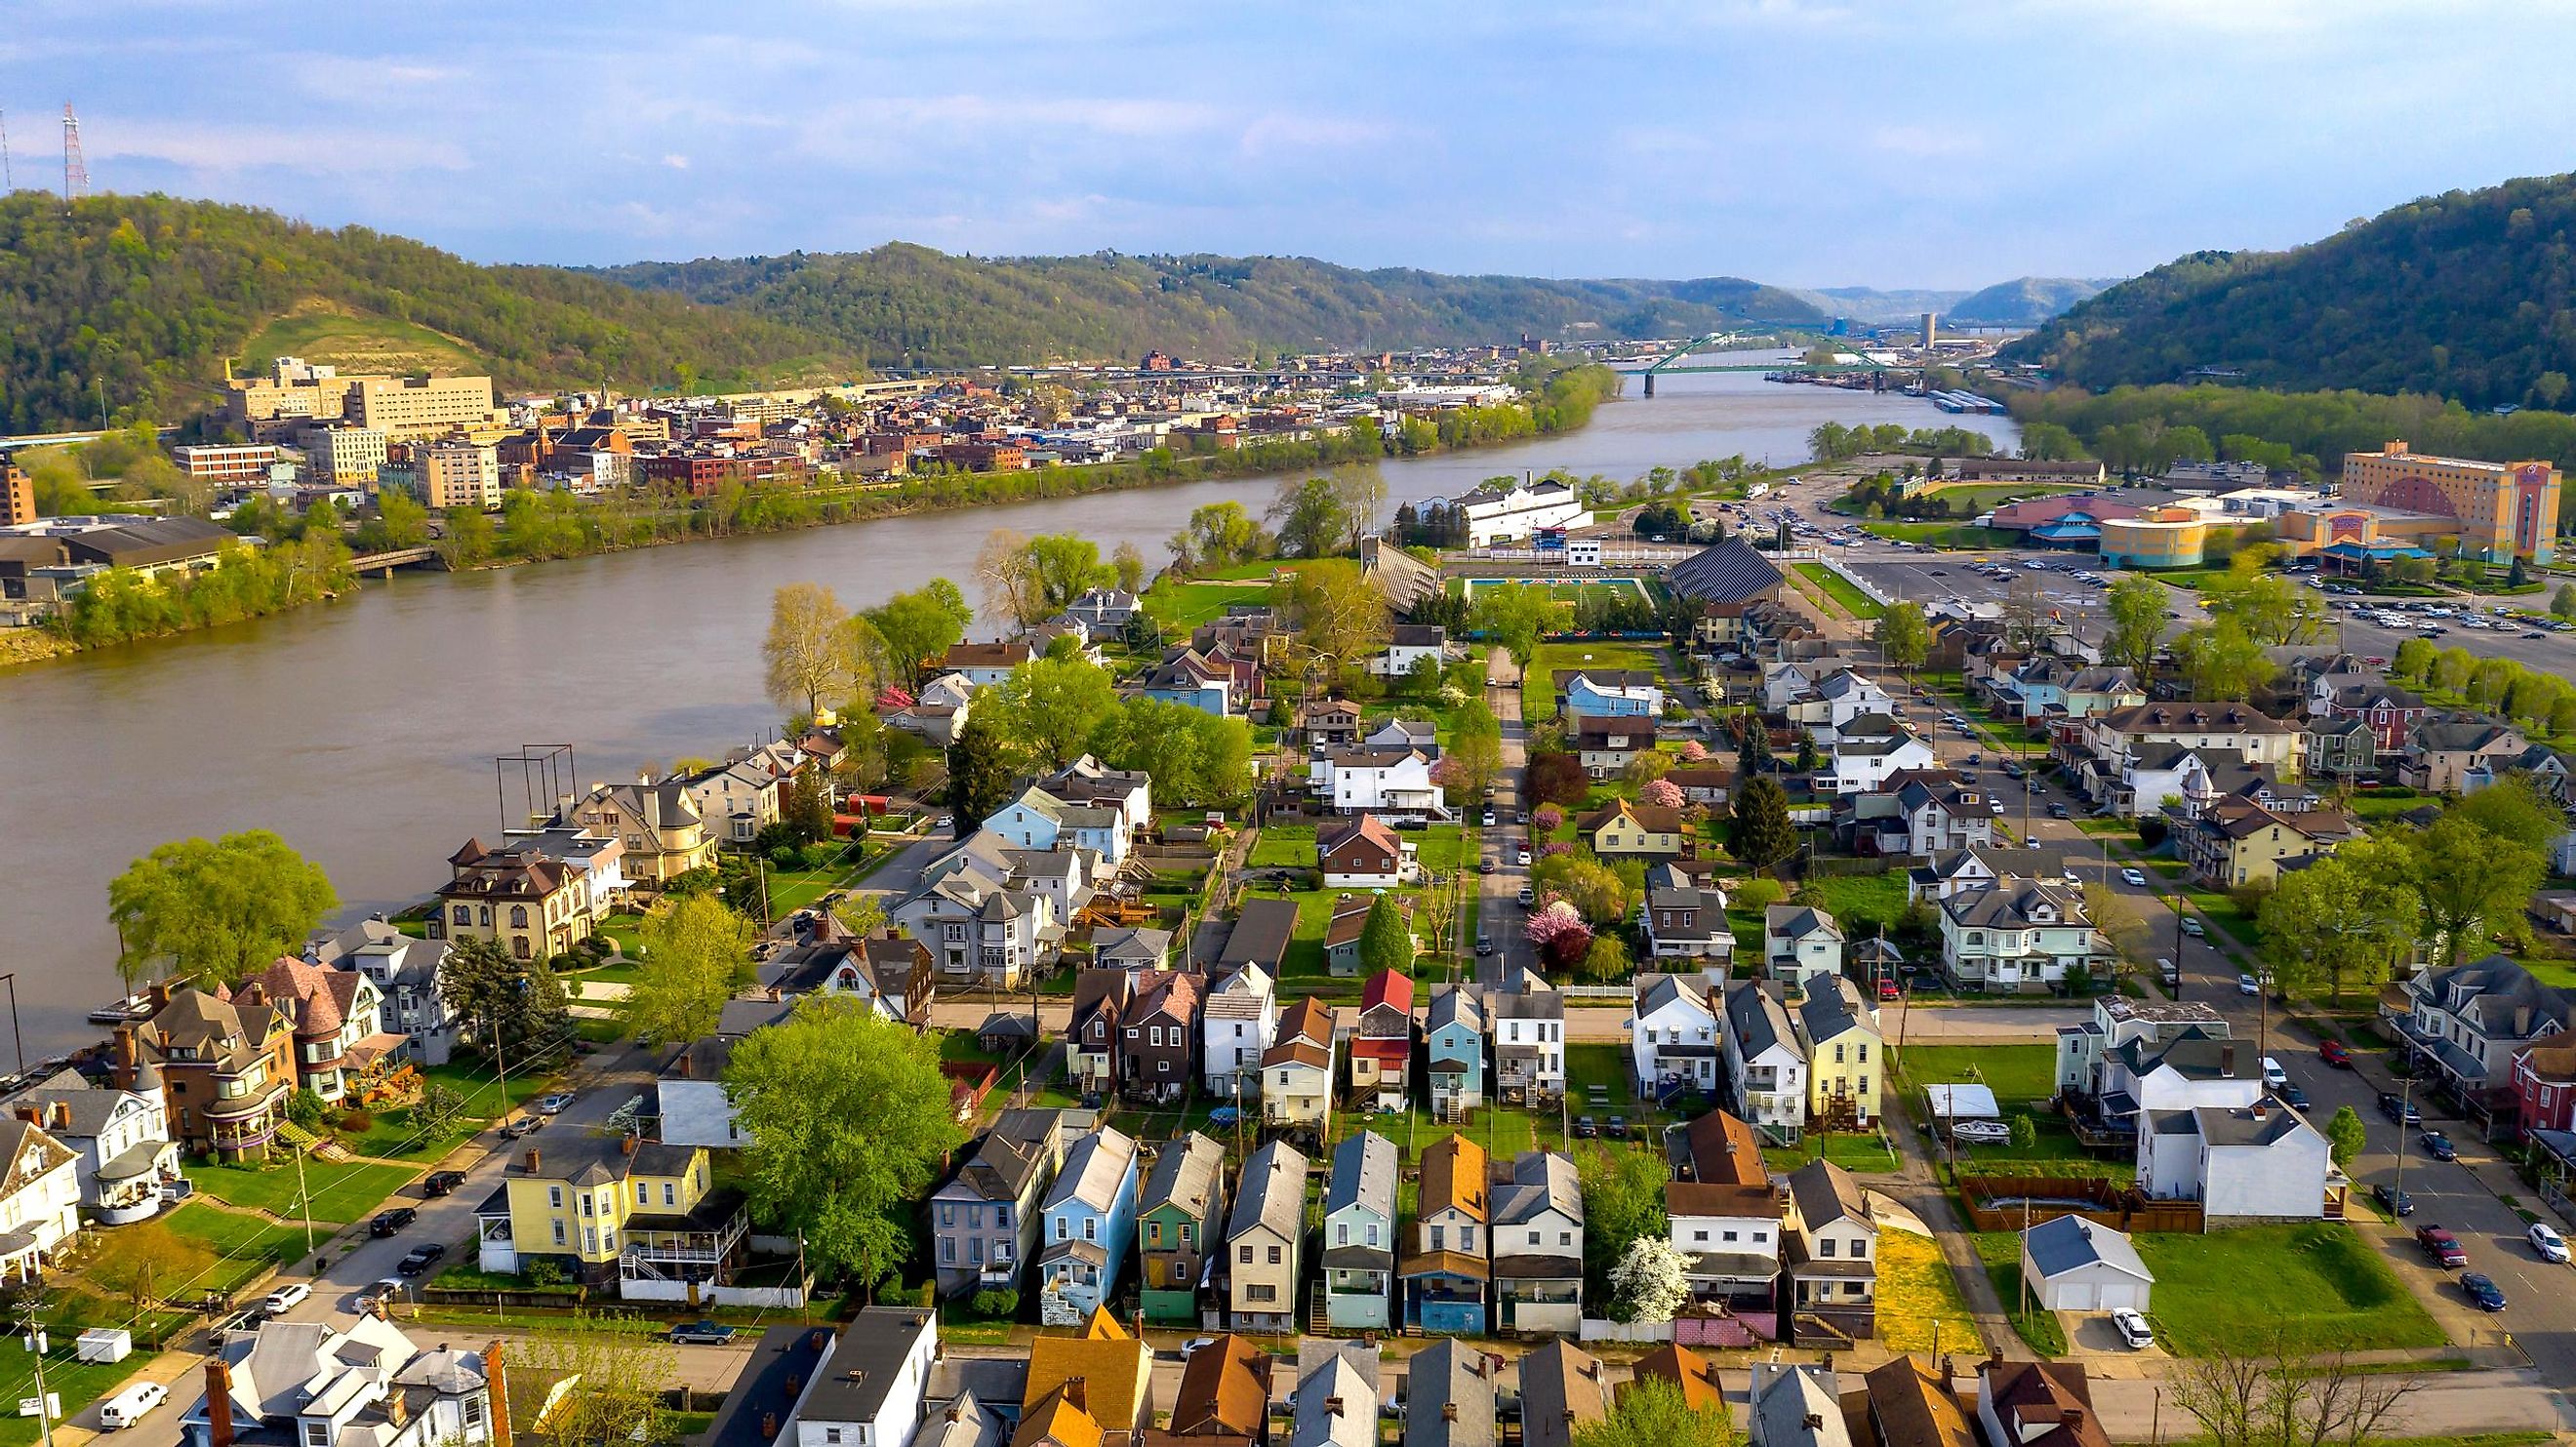 Aerial view of the picturesque town of Wheeling.